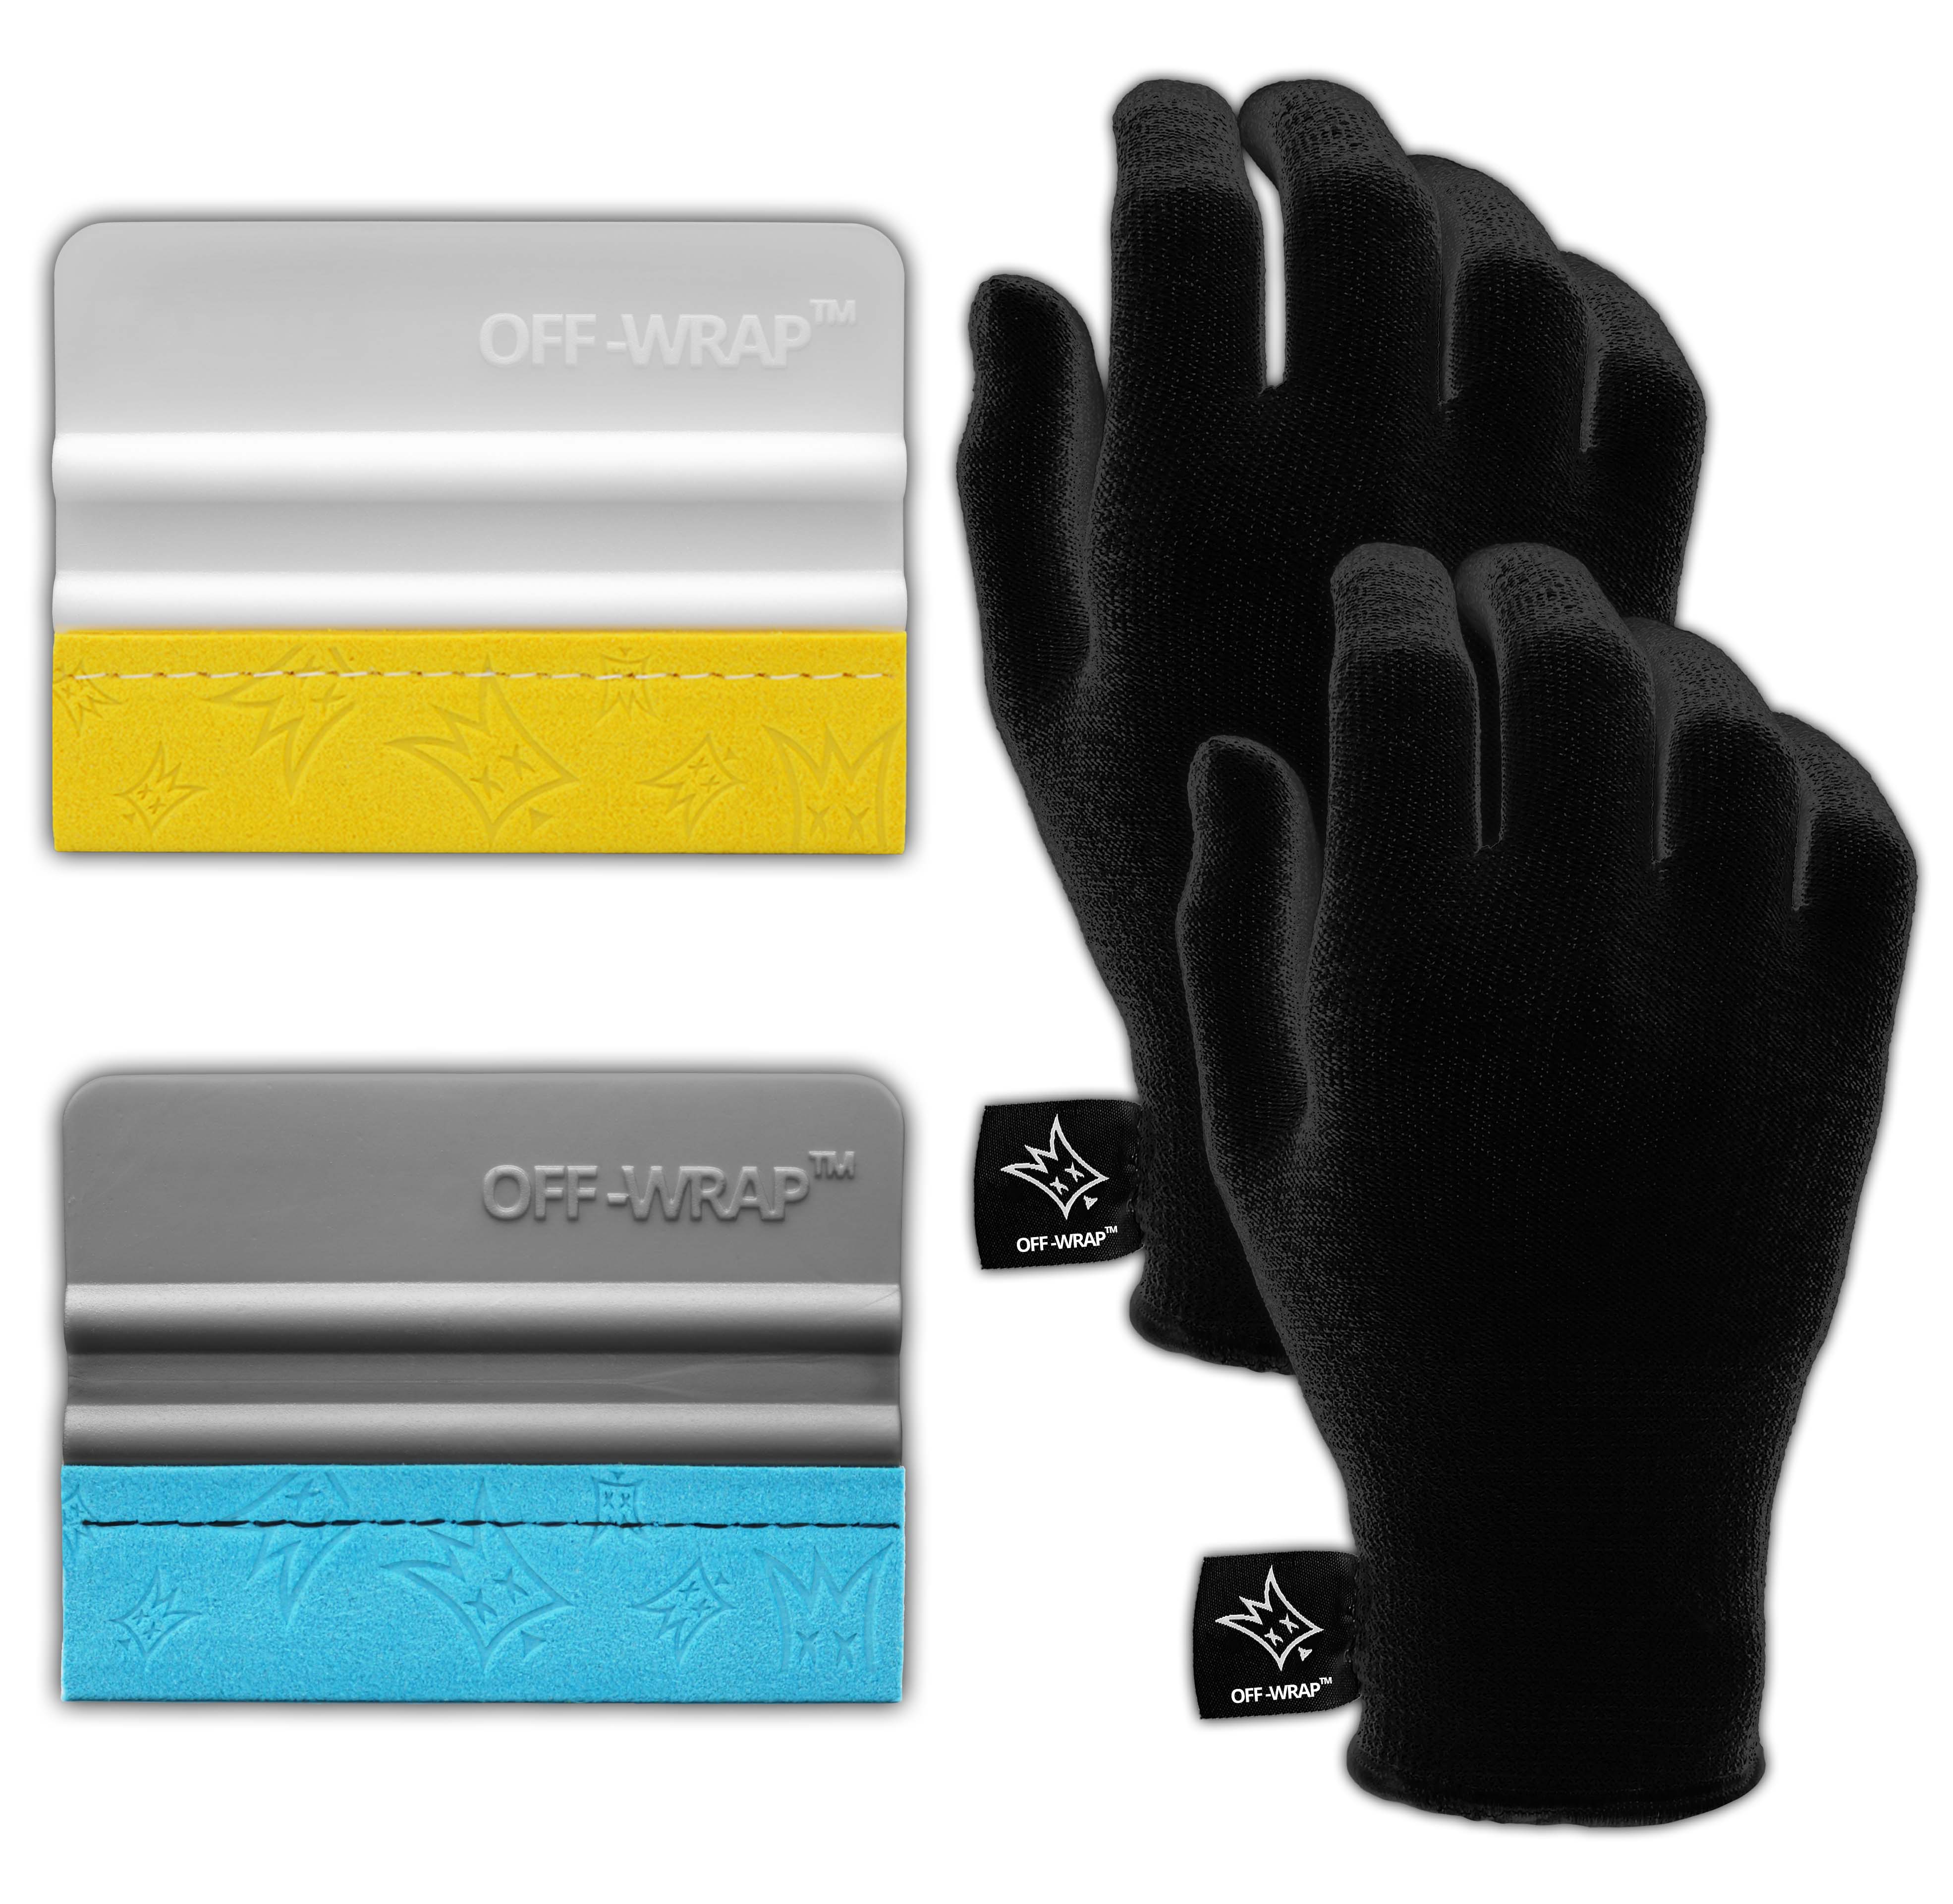 HOW DO WRAP GLOVES PERFORM? FIND OUT WHICH ONES